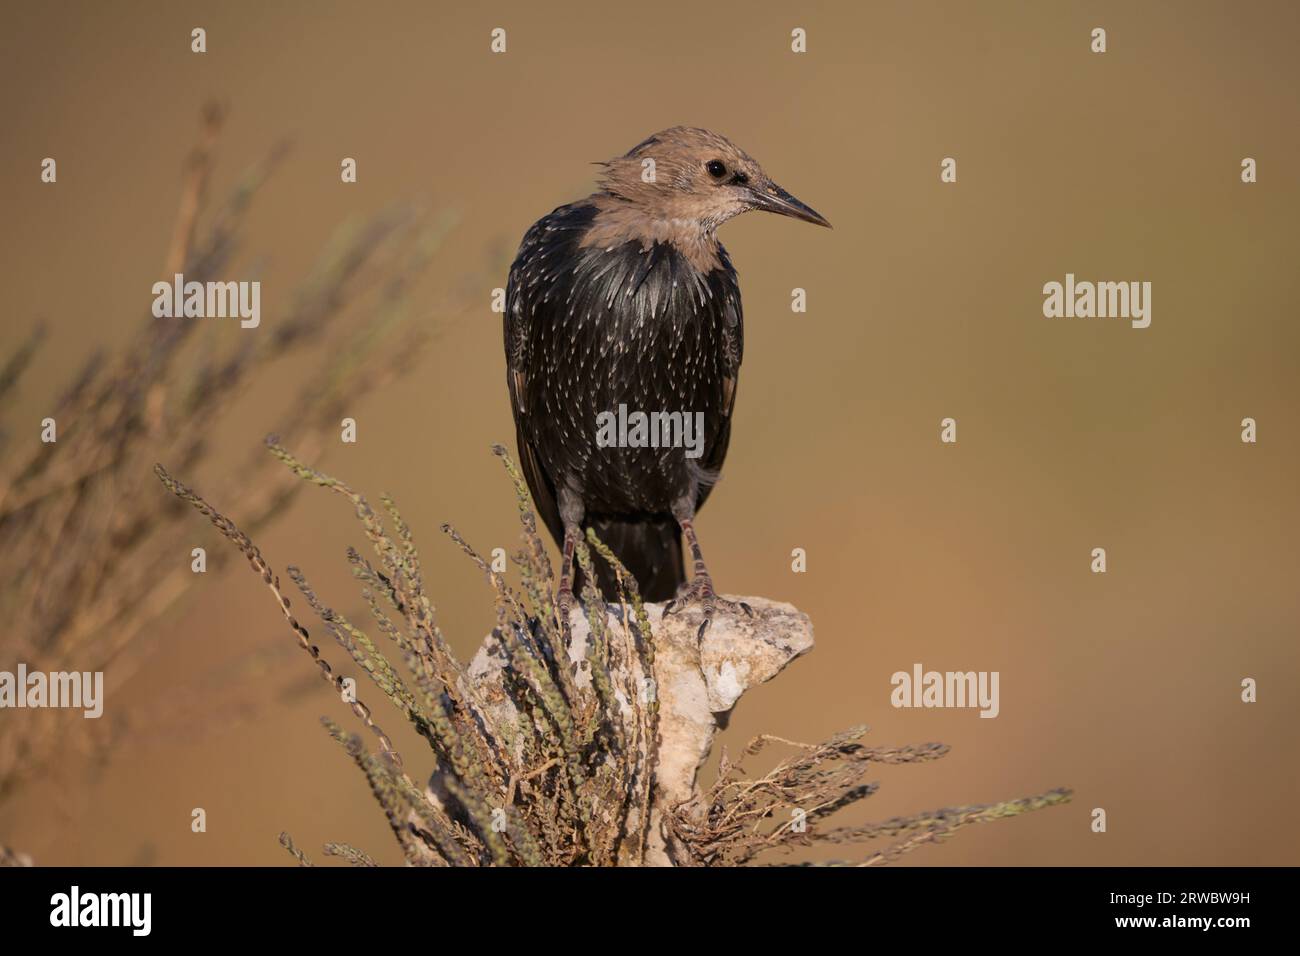 Black wild starling bird sitting on stone in a field on sunny summer day in nature in blurred background Stock Photo